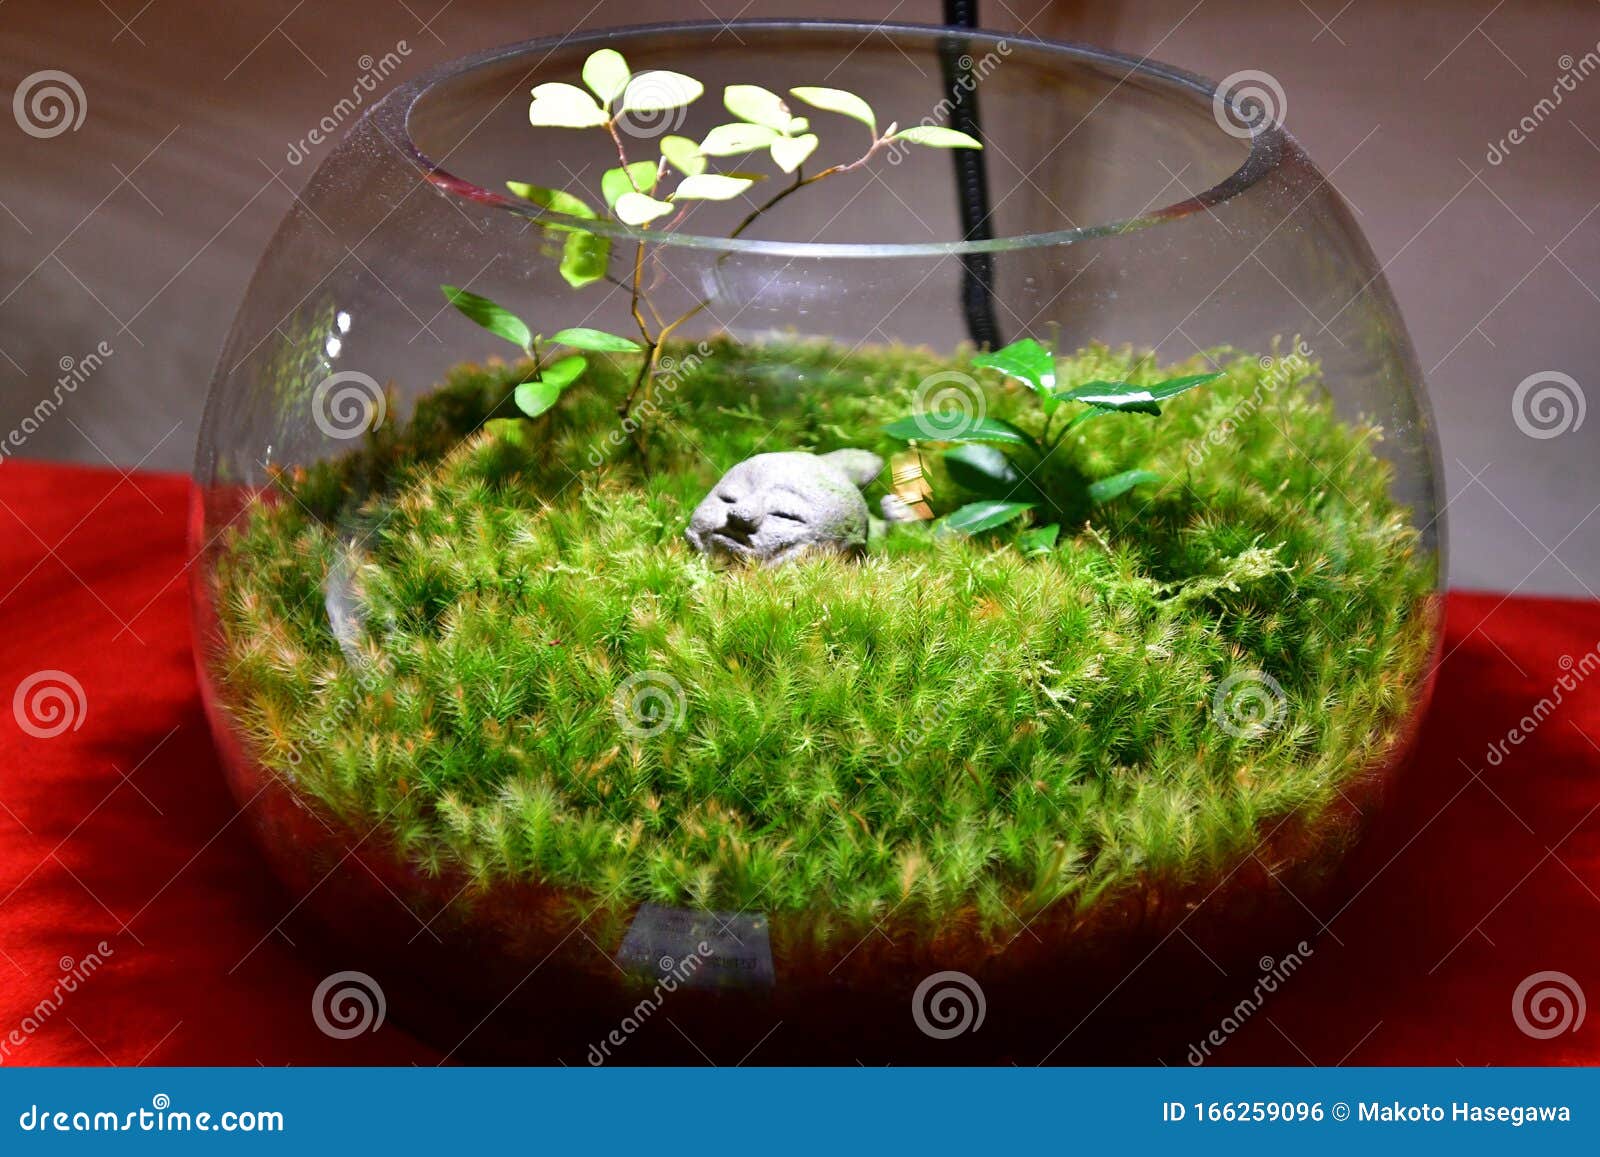 what are moss terrariums